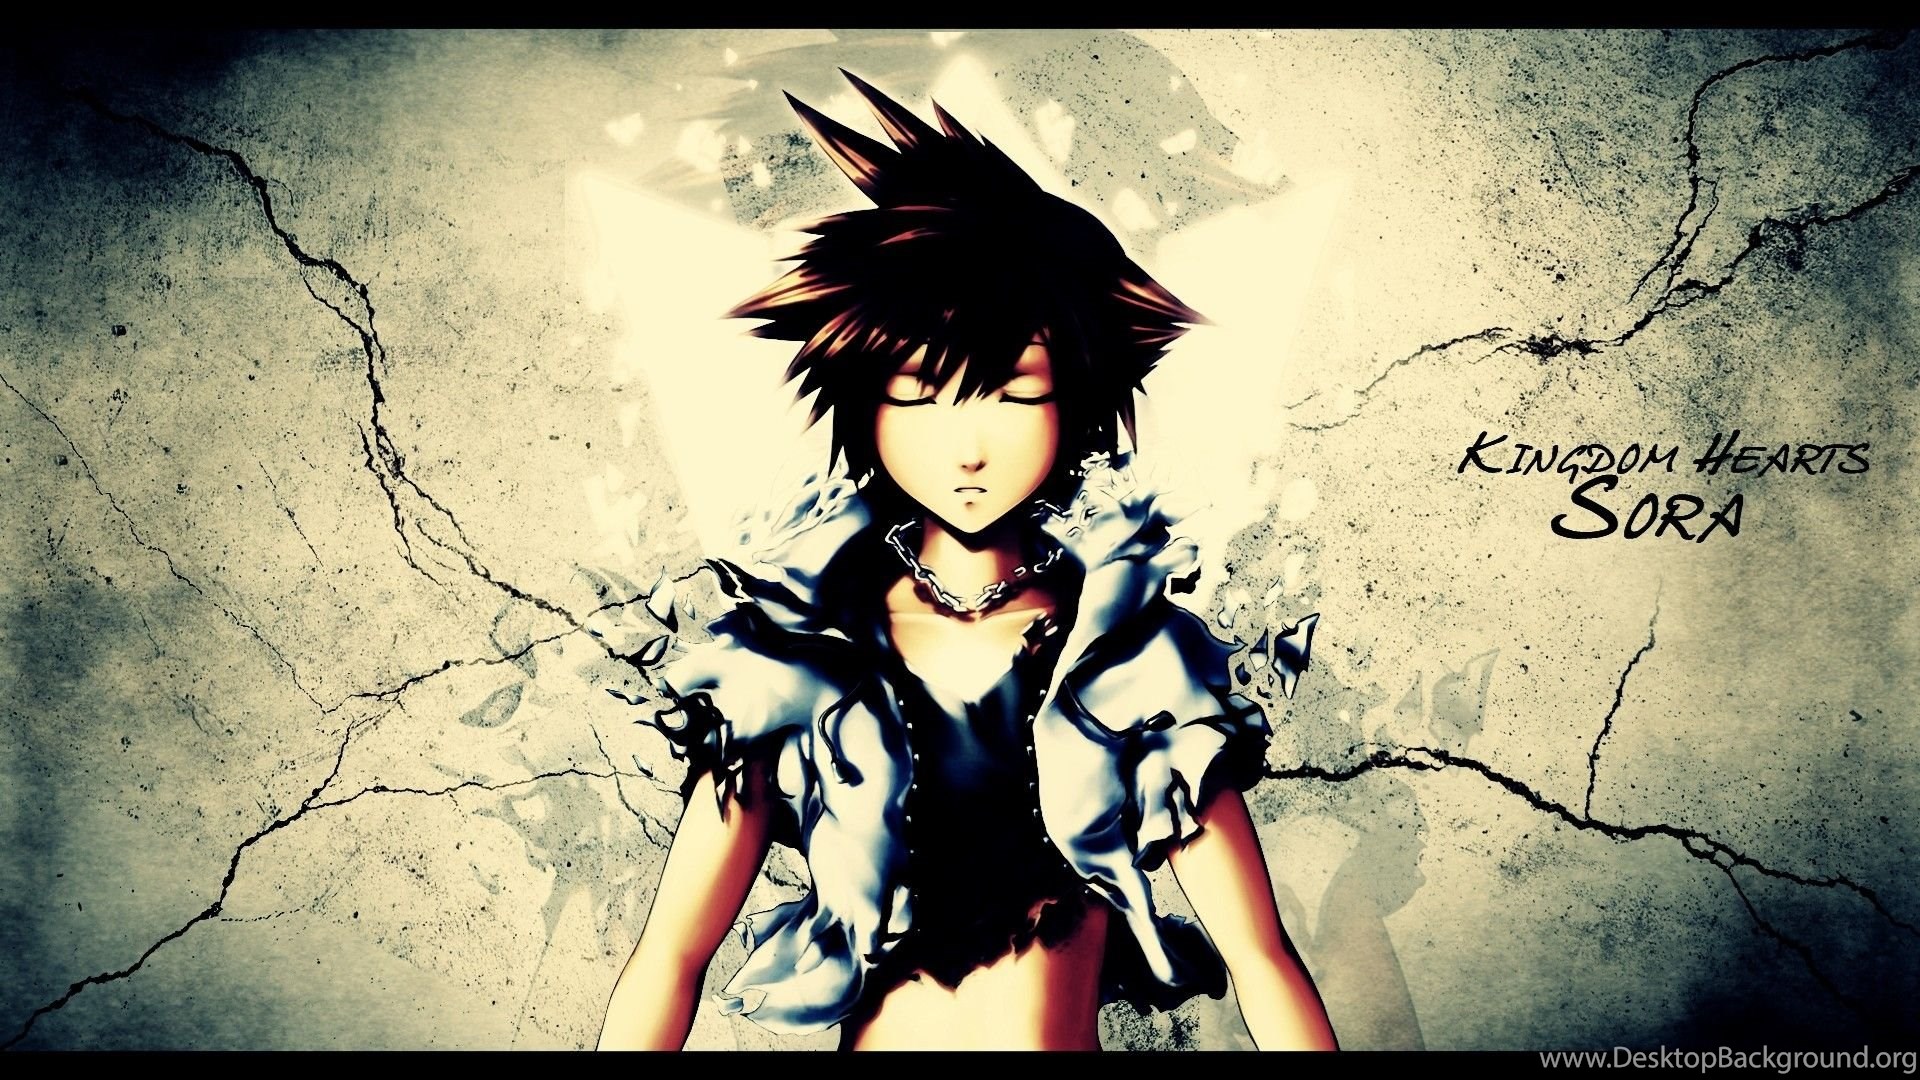 Kingdom Hearts Wallpapers Hd All Wallpapers New Desktop Background